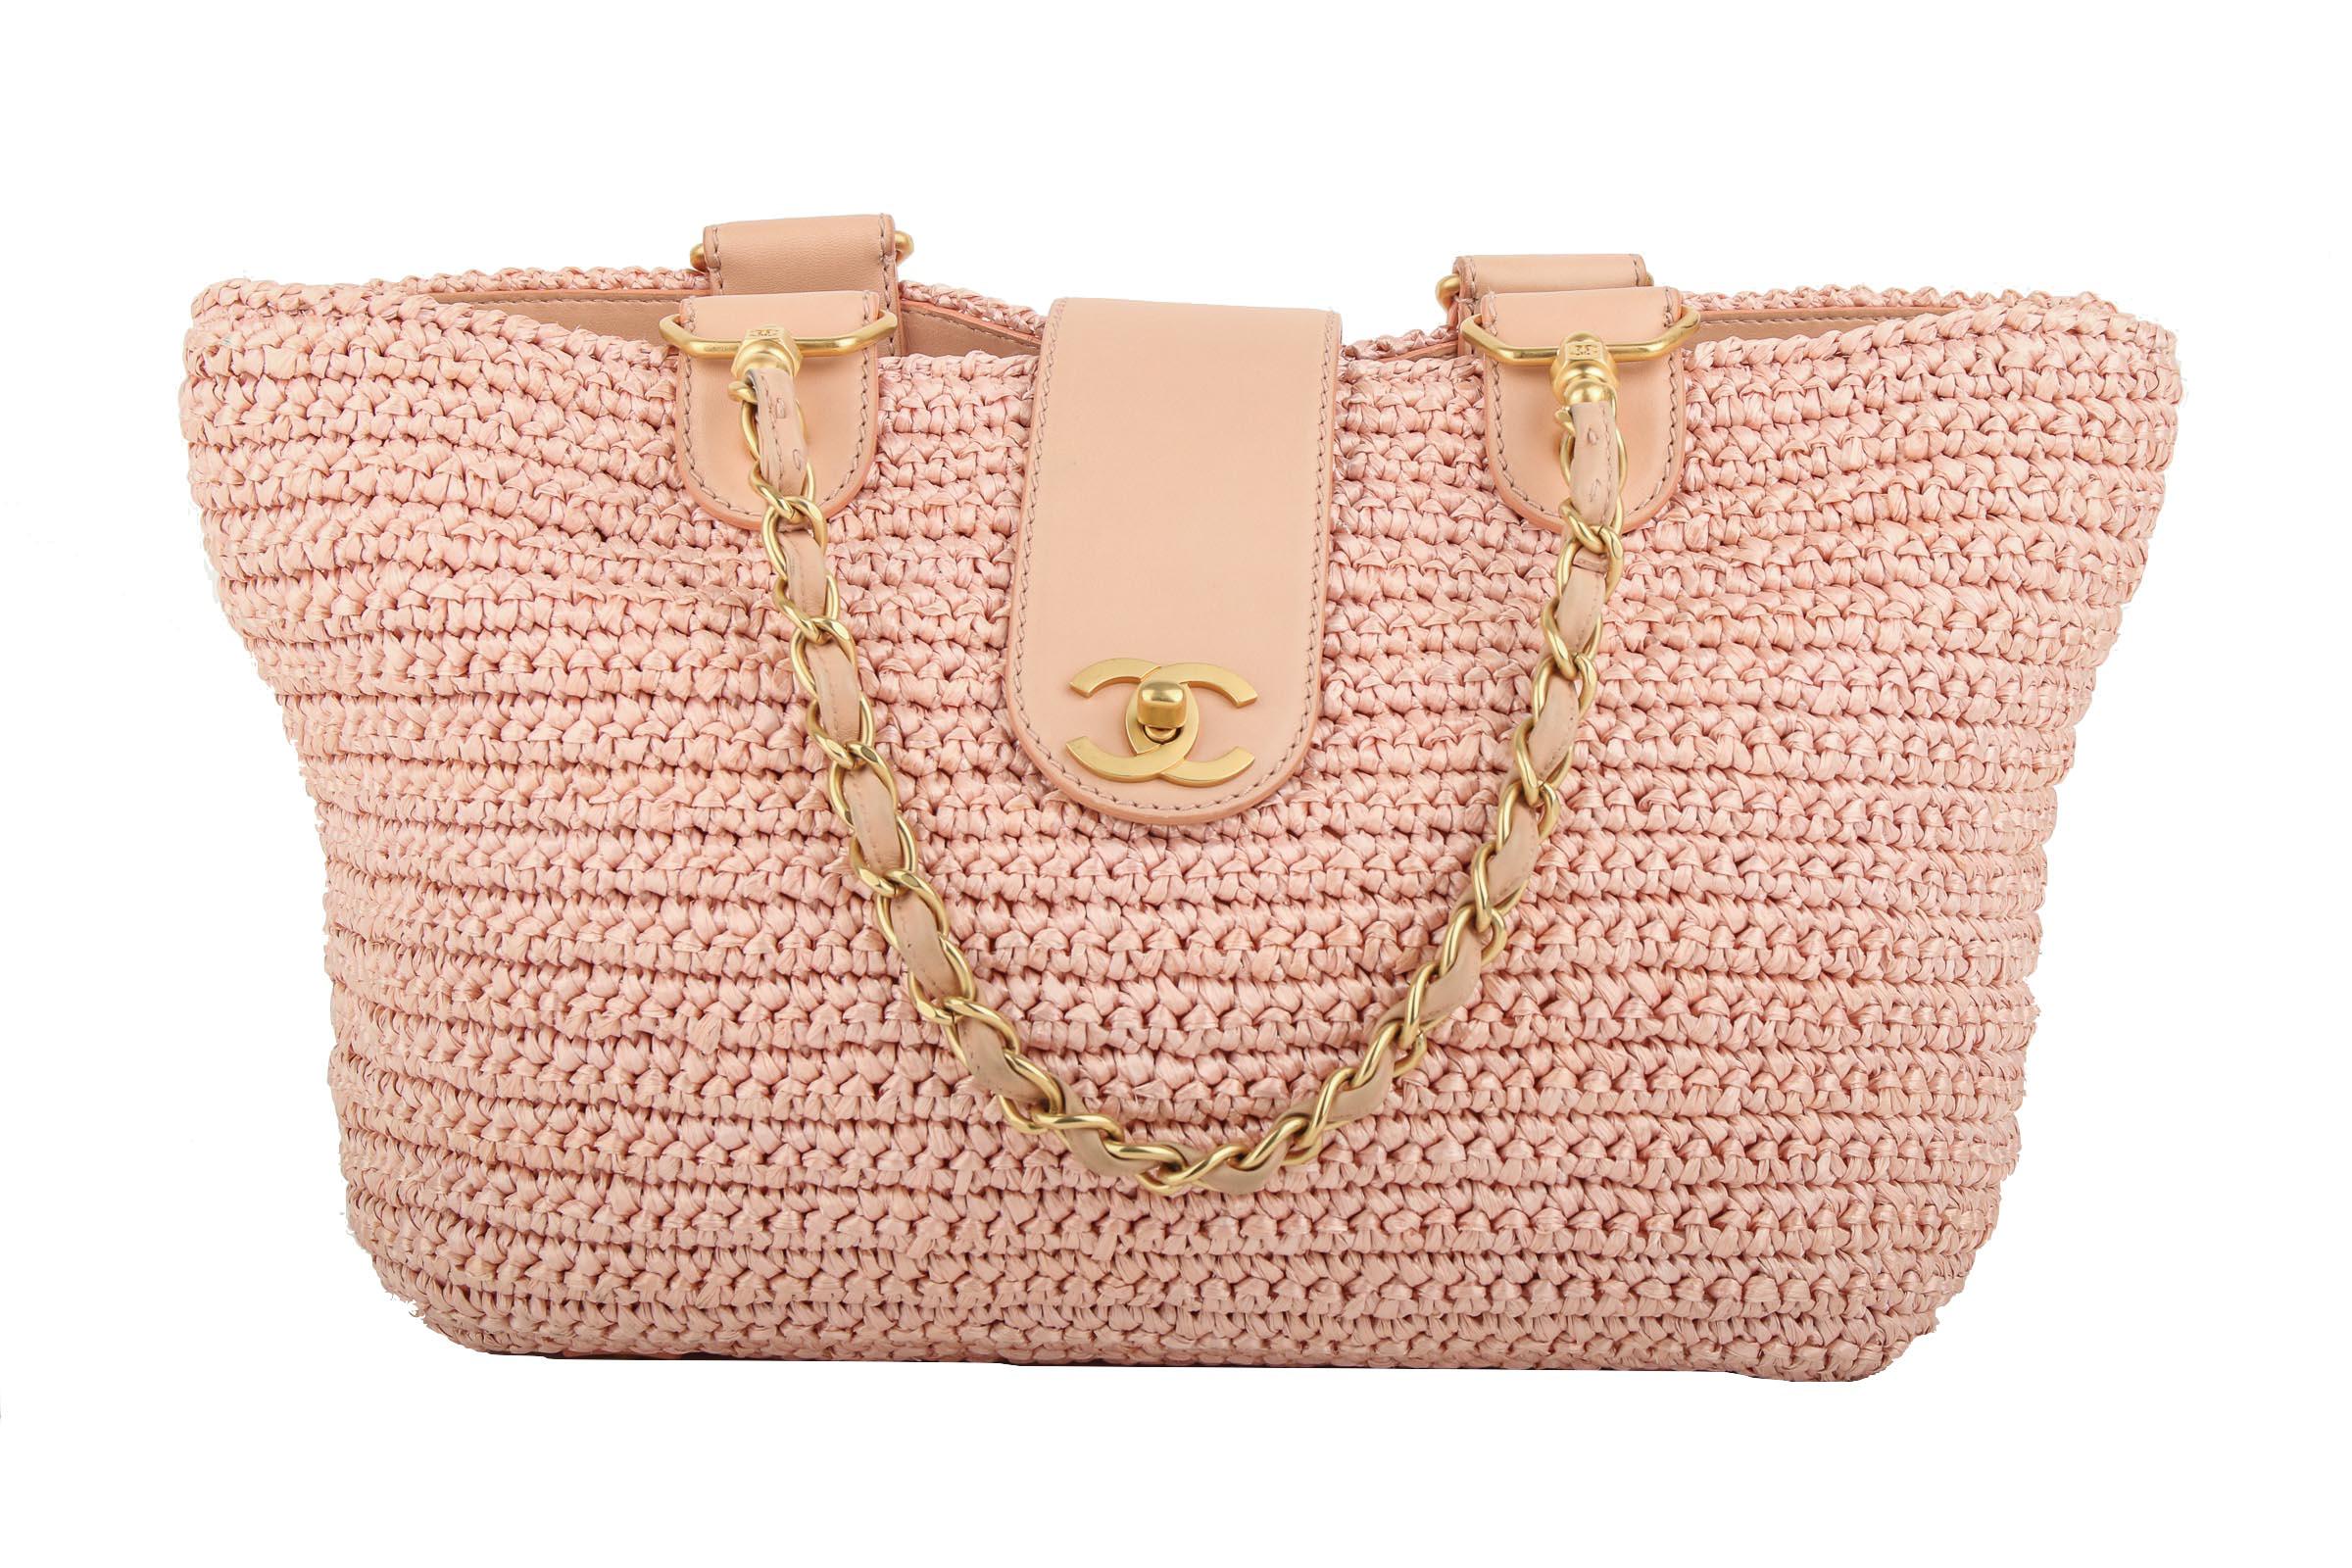 Chanel 2005 Rare Vintage Raffia Woven Pink Straw and Leather Basket Tote

2005 {VINTAGE 18 Years}
Brushed gold hardware
Woven pink raffia straw
Classic interwoven chain
CC Classic Turnlock
CC pink logo fabric interior 
Interior zippered pocket